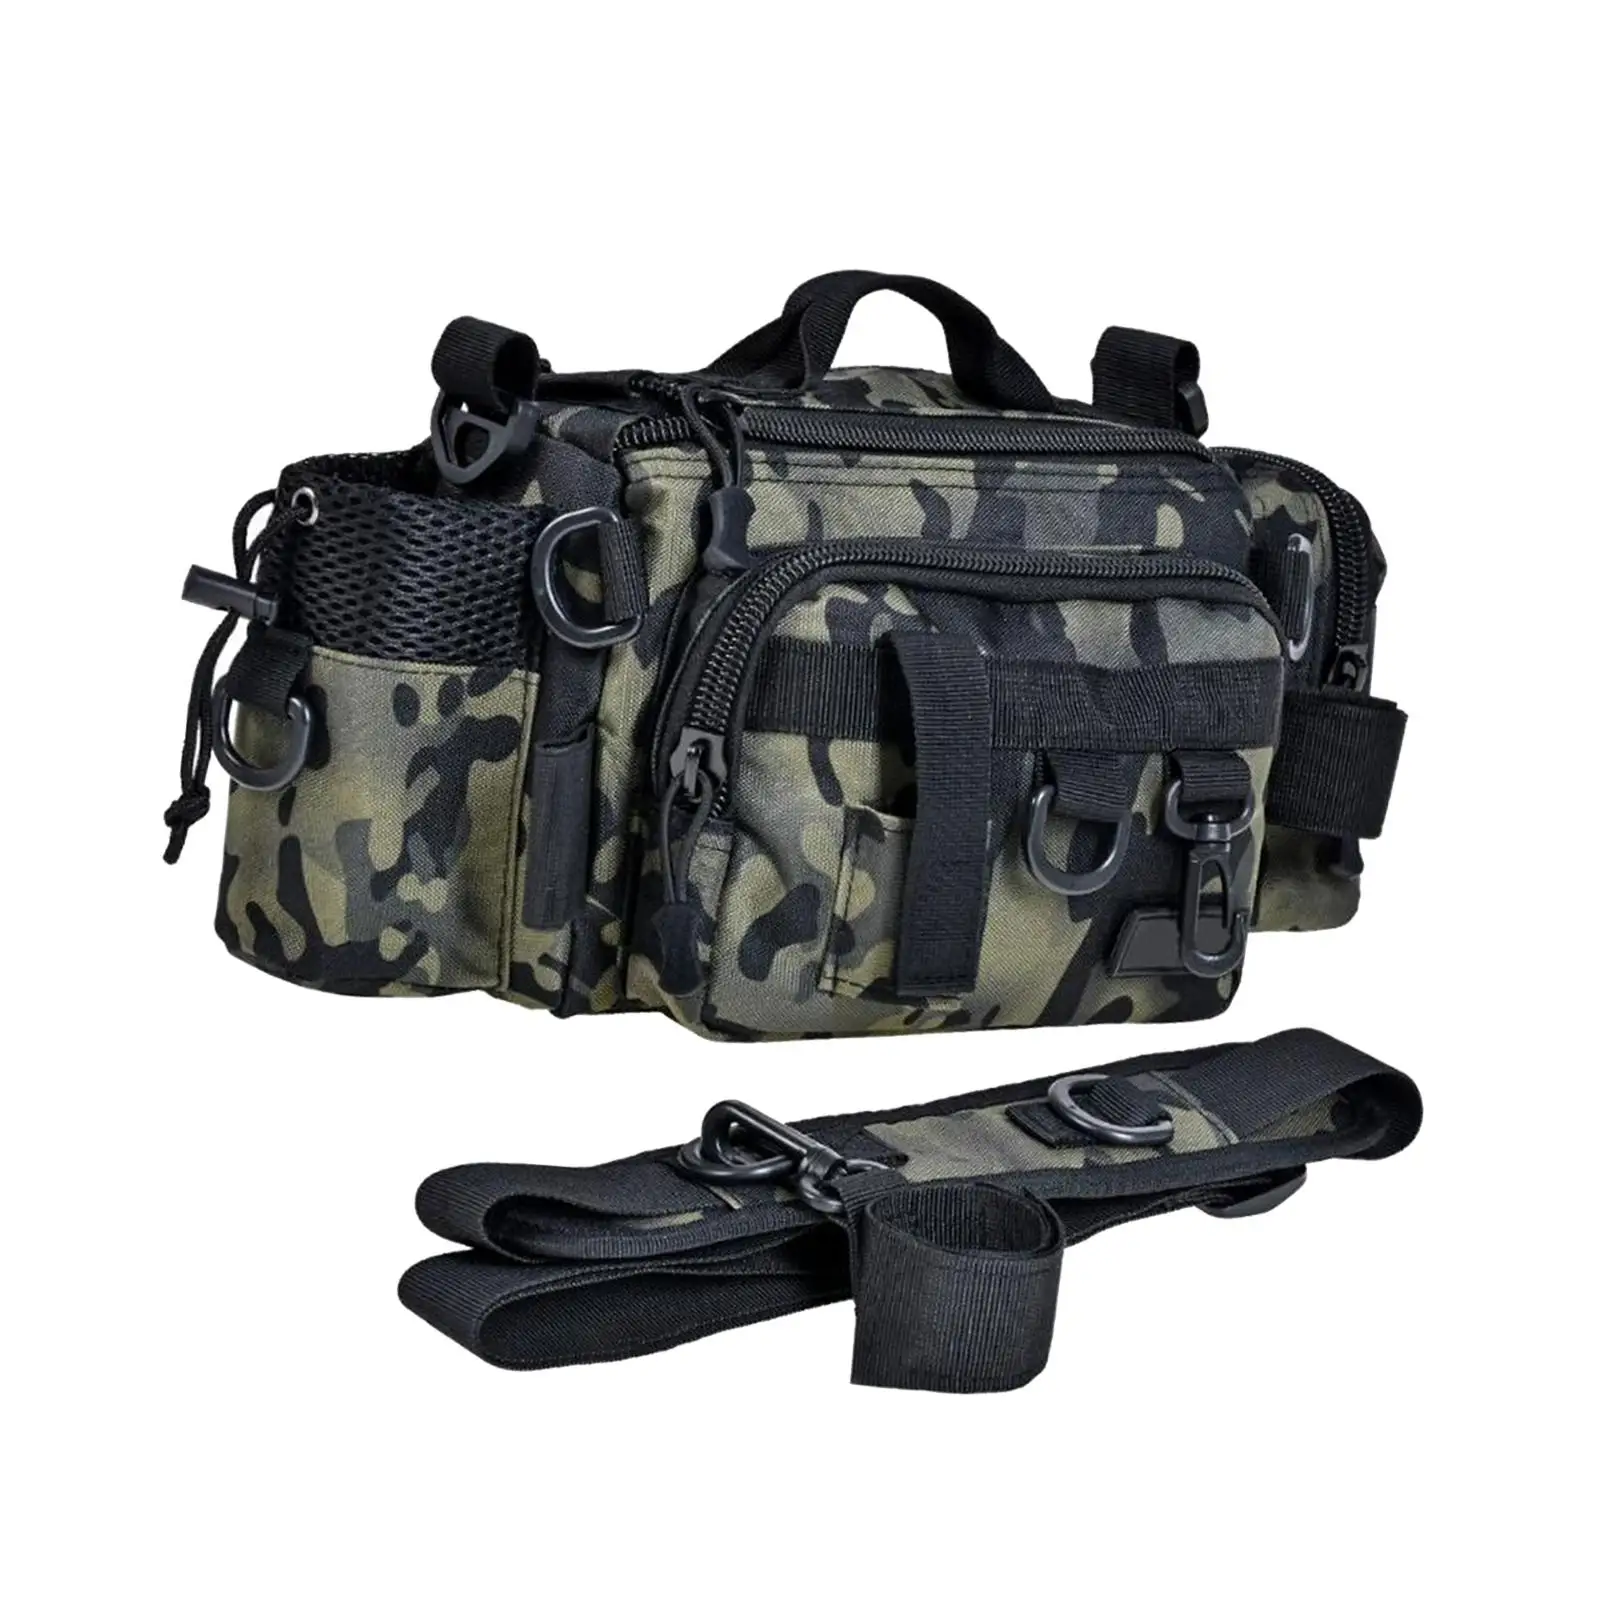 1000D Oxford Fishing Tackle Storage Bag Resistant Tackle Bag for Fishing Hunting